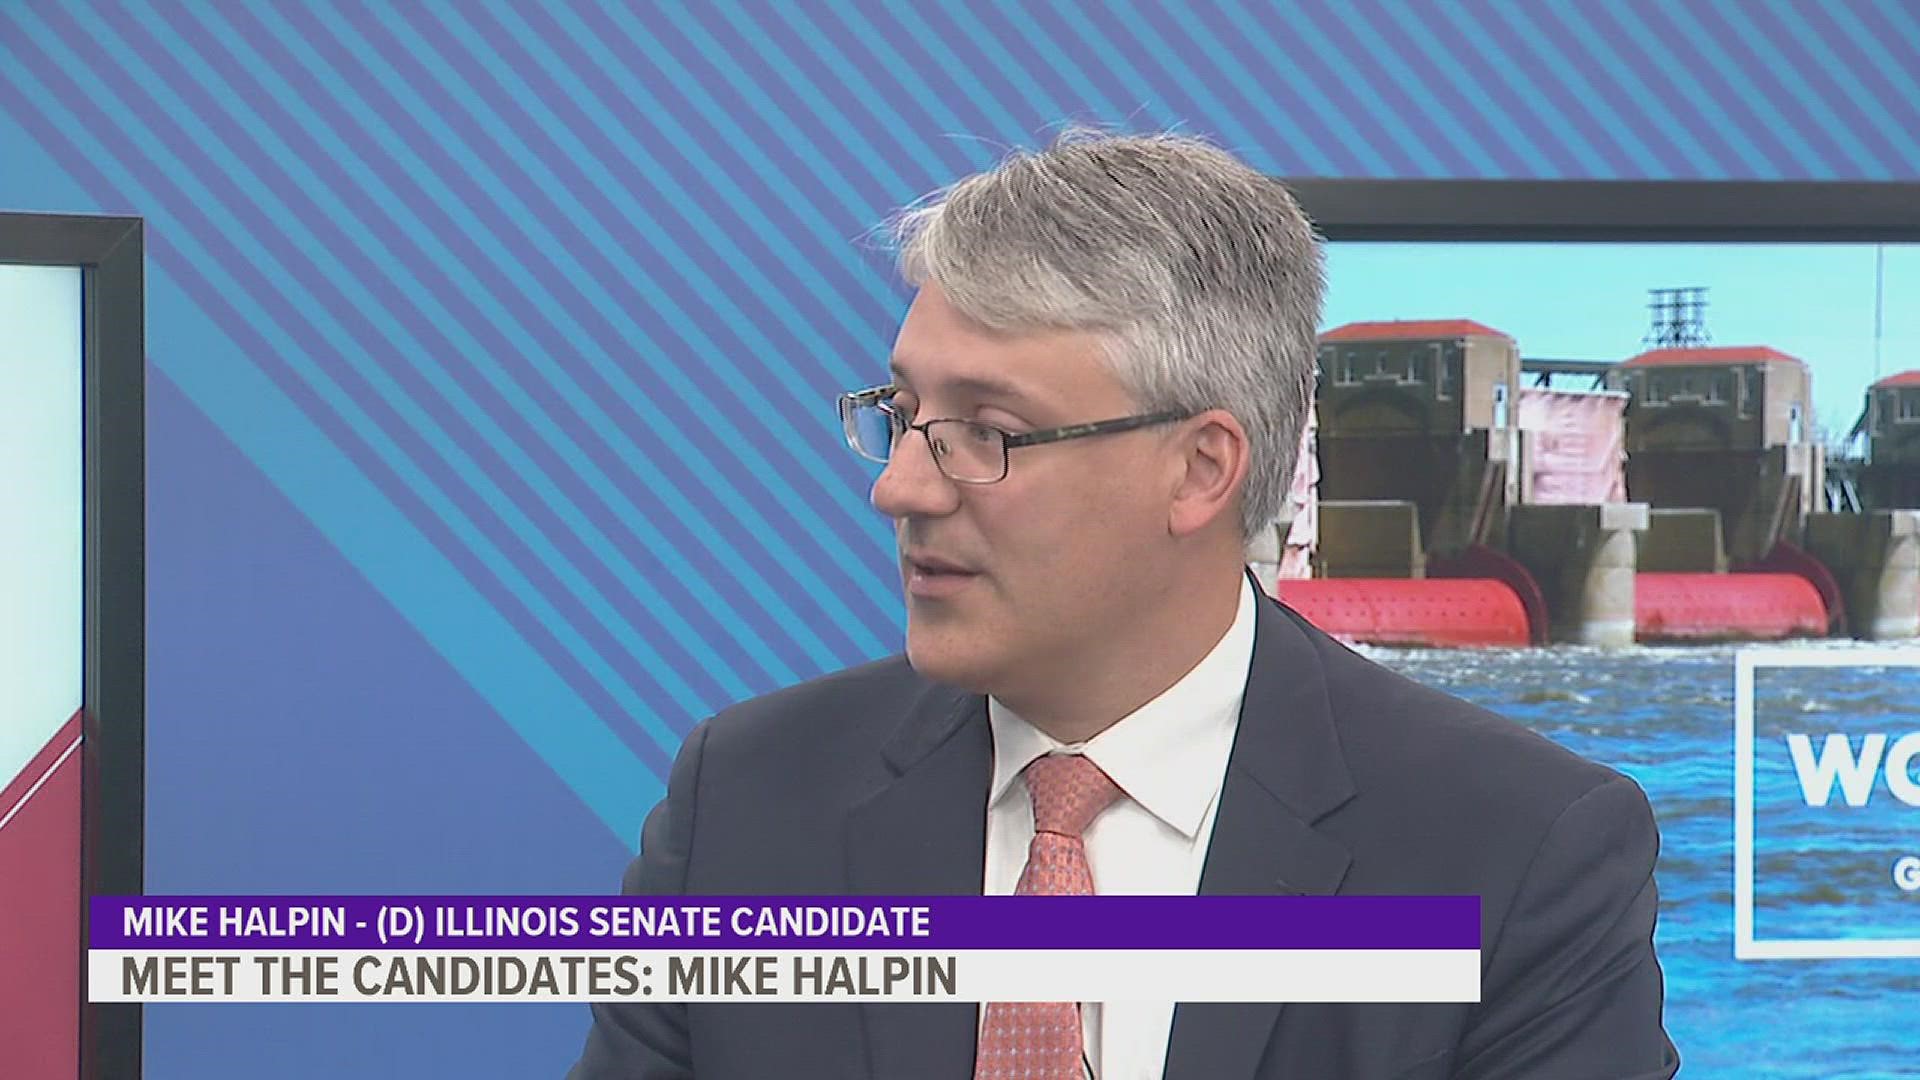 The Democratic candidate for Illinois's 36th Legislative District sat with News 8's Shelby Kluver to showcase his policies and values ahead of the midterm elections.